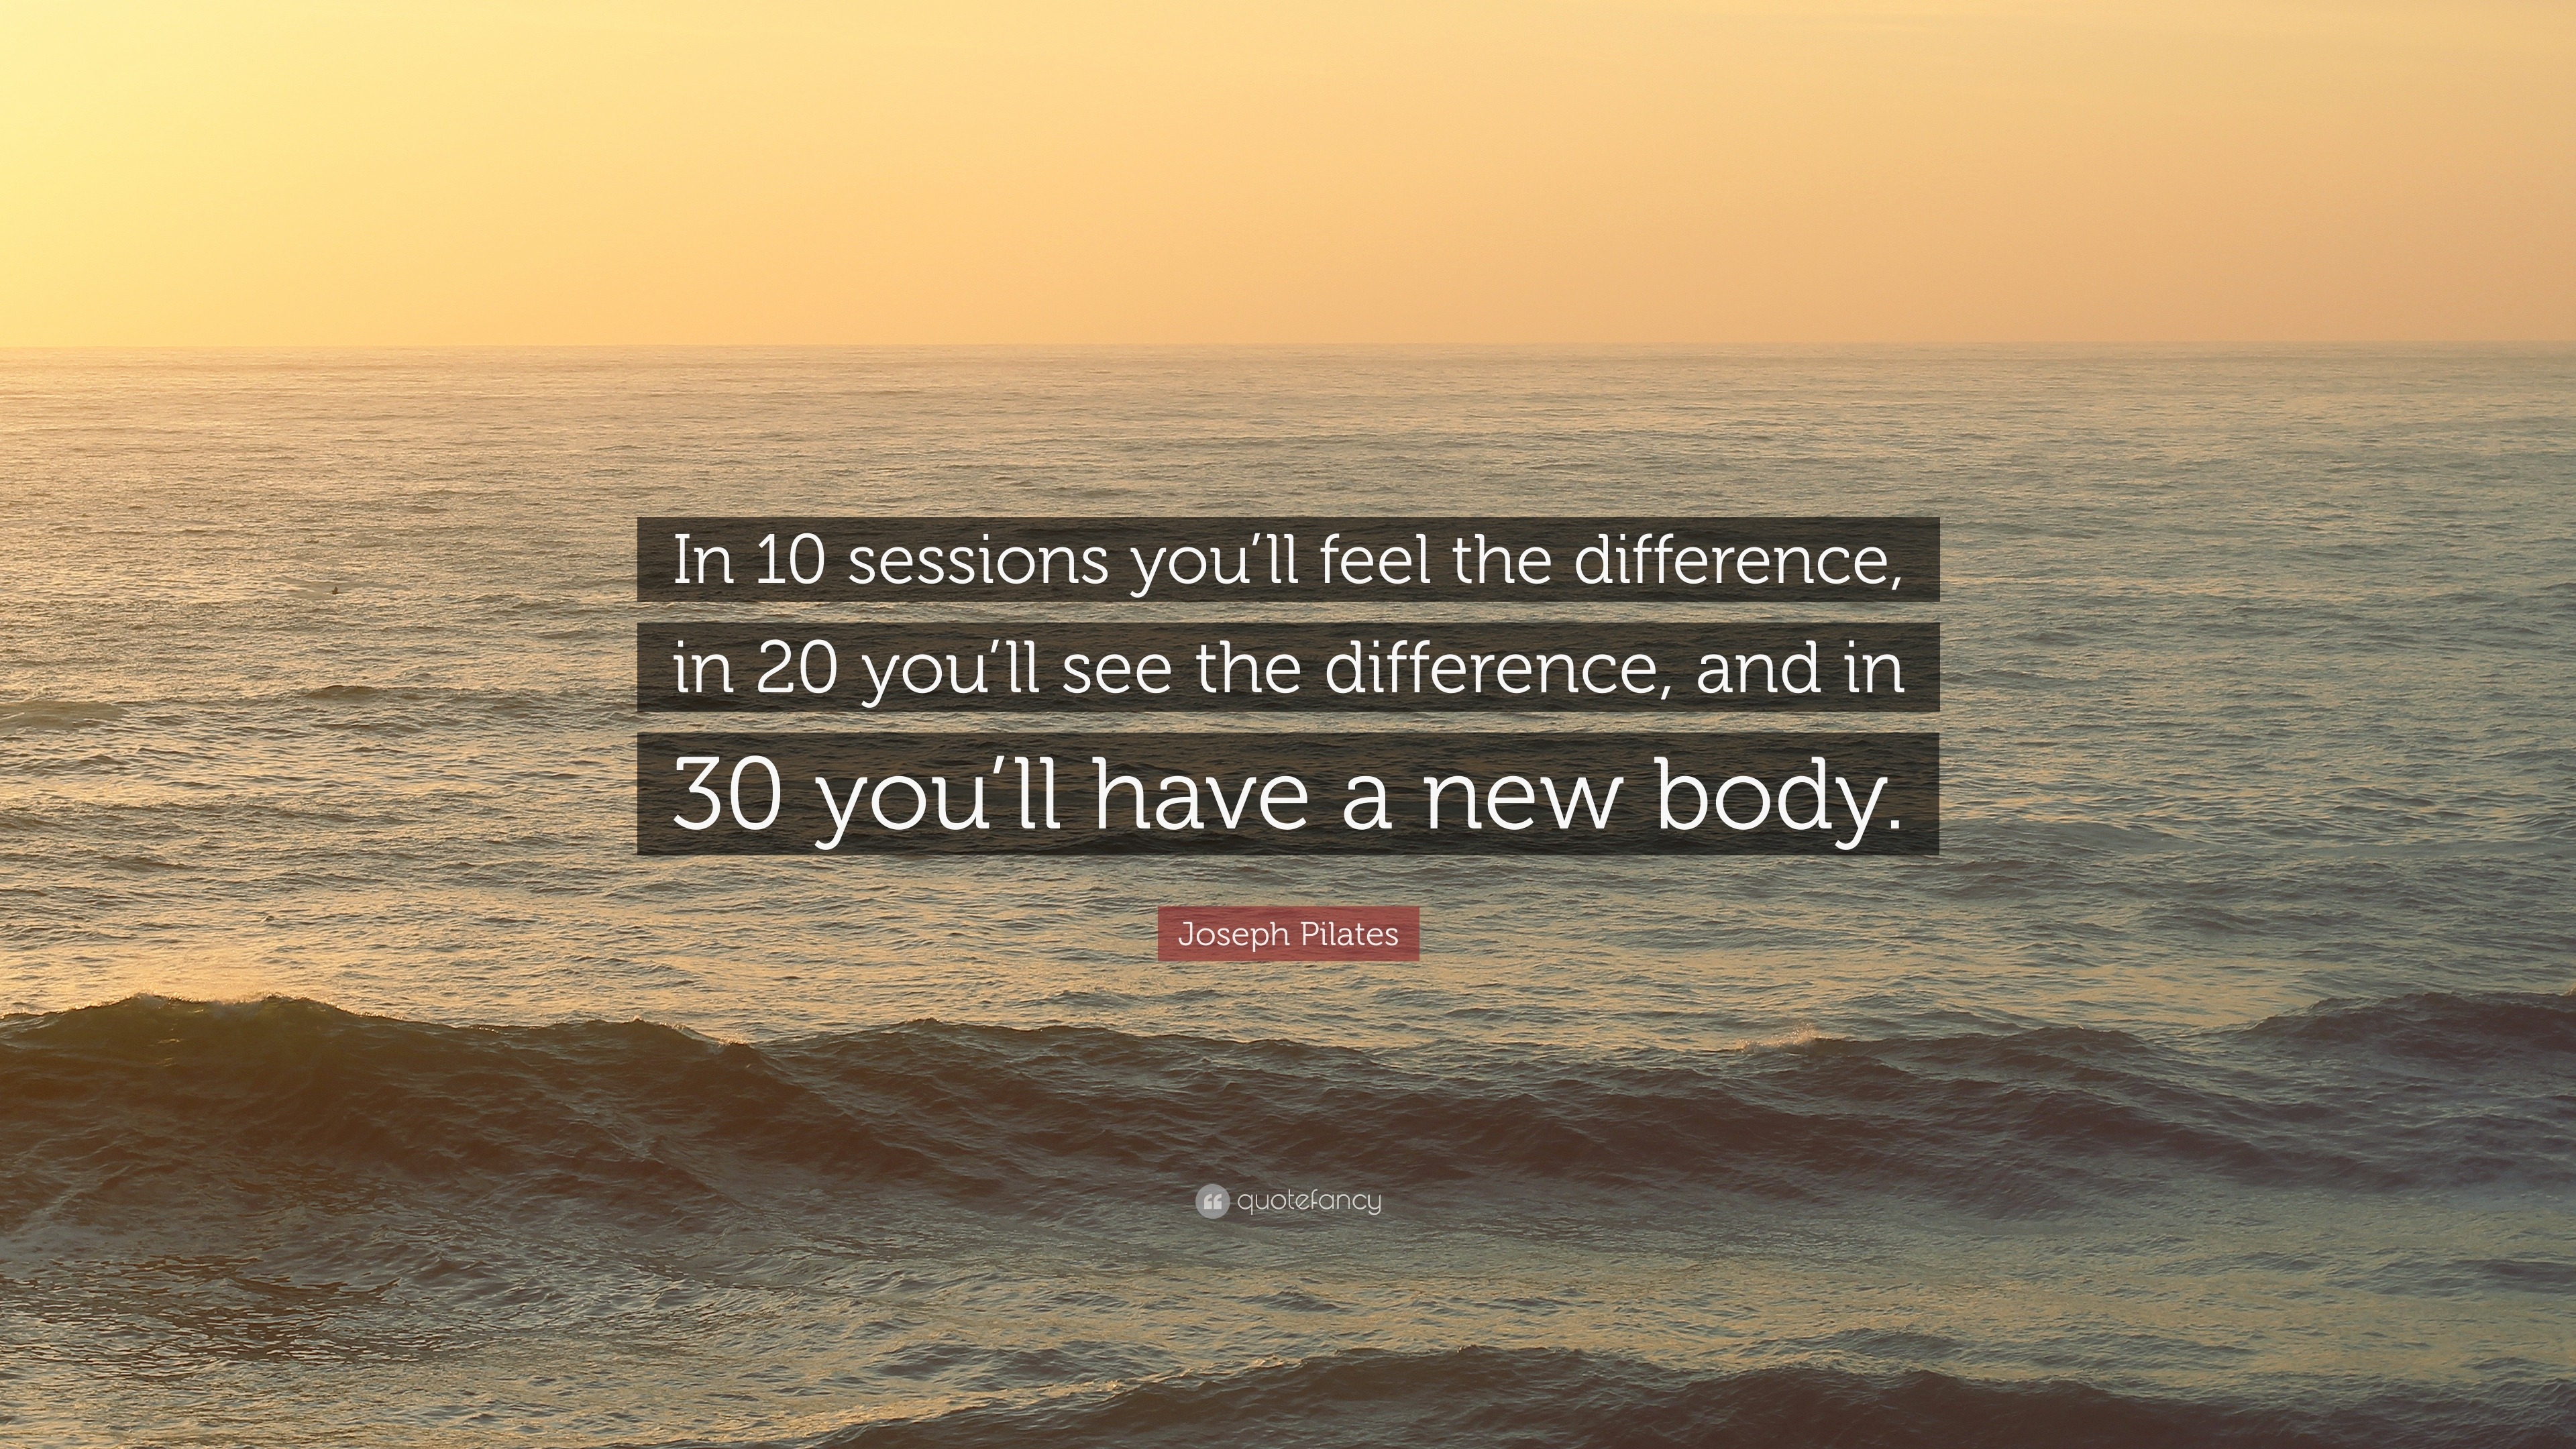 Joseph Pilates Quote: “In 10 sessions you'll feel the difference, in 20  you'll see